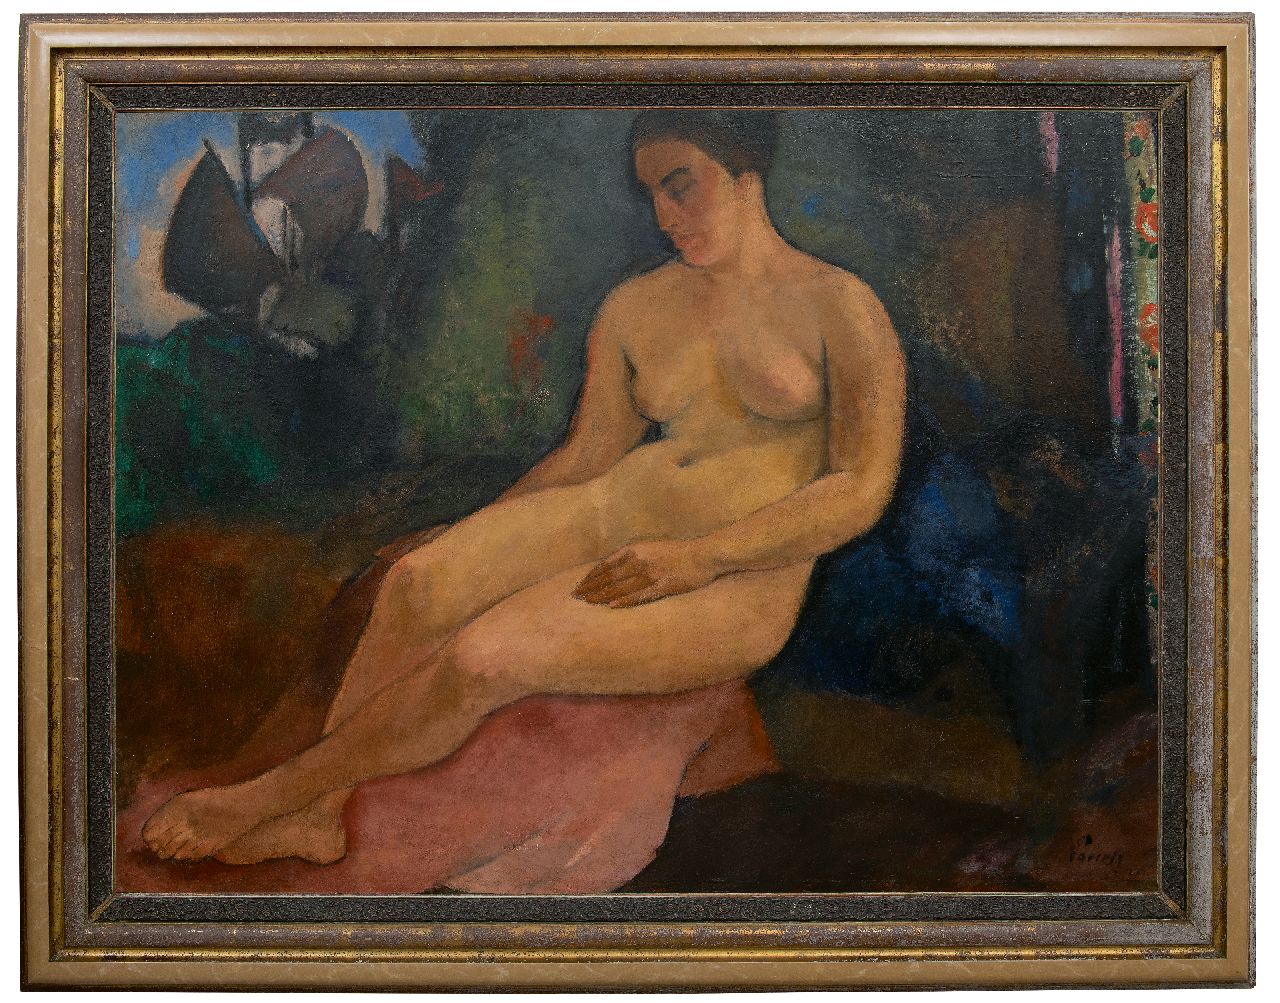 Paerels W.A.  | 'Willem' Adriaan Paerels | Paintings offered for sale | Seated nude in a landscape, oil on canvas 104.3 x 138.2 cm, signed l.r.